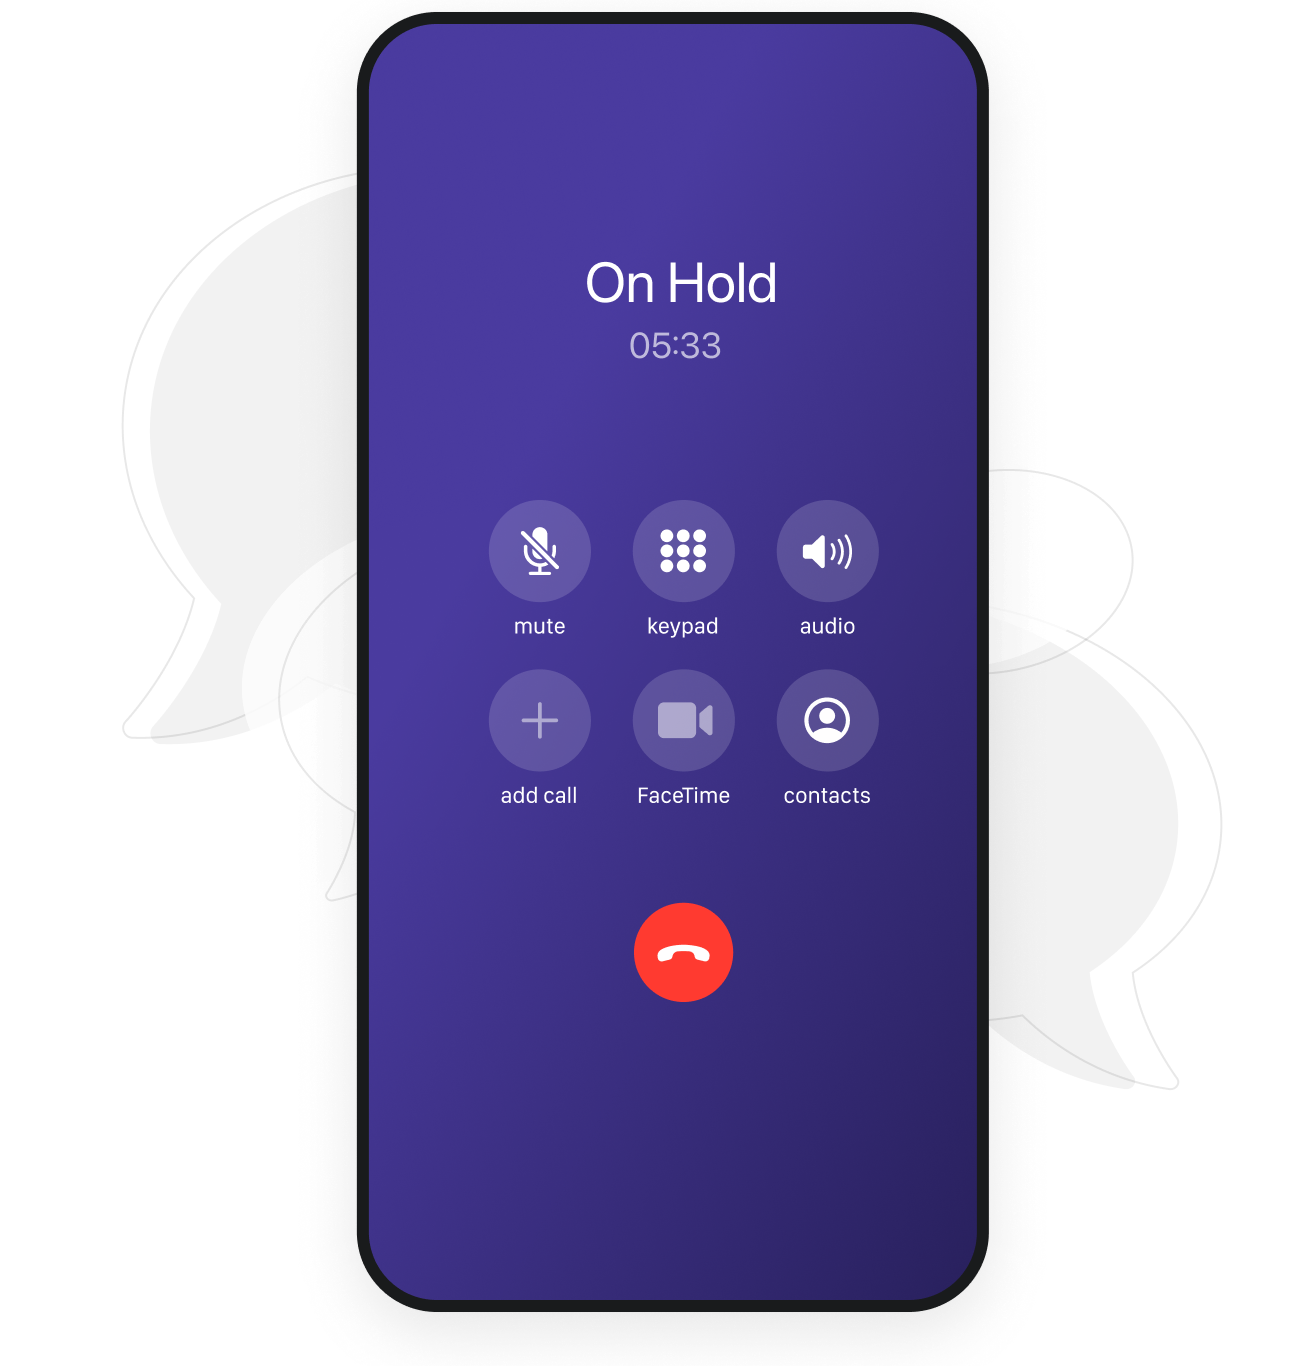 On Hold Messaging